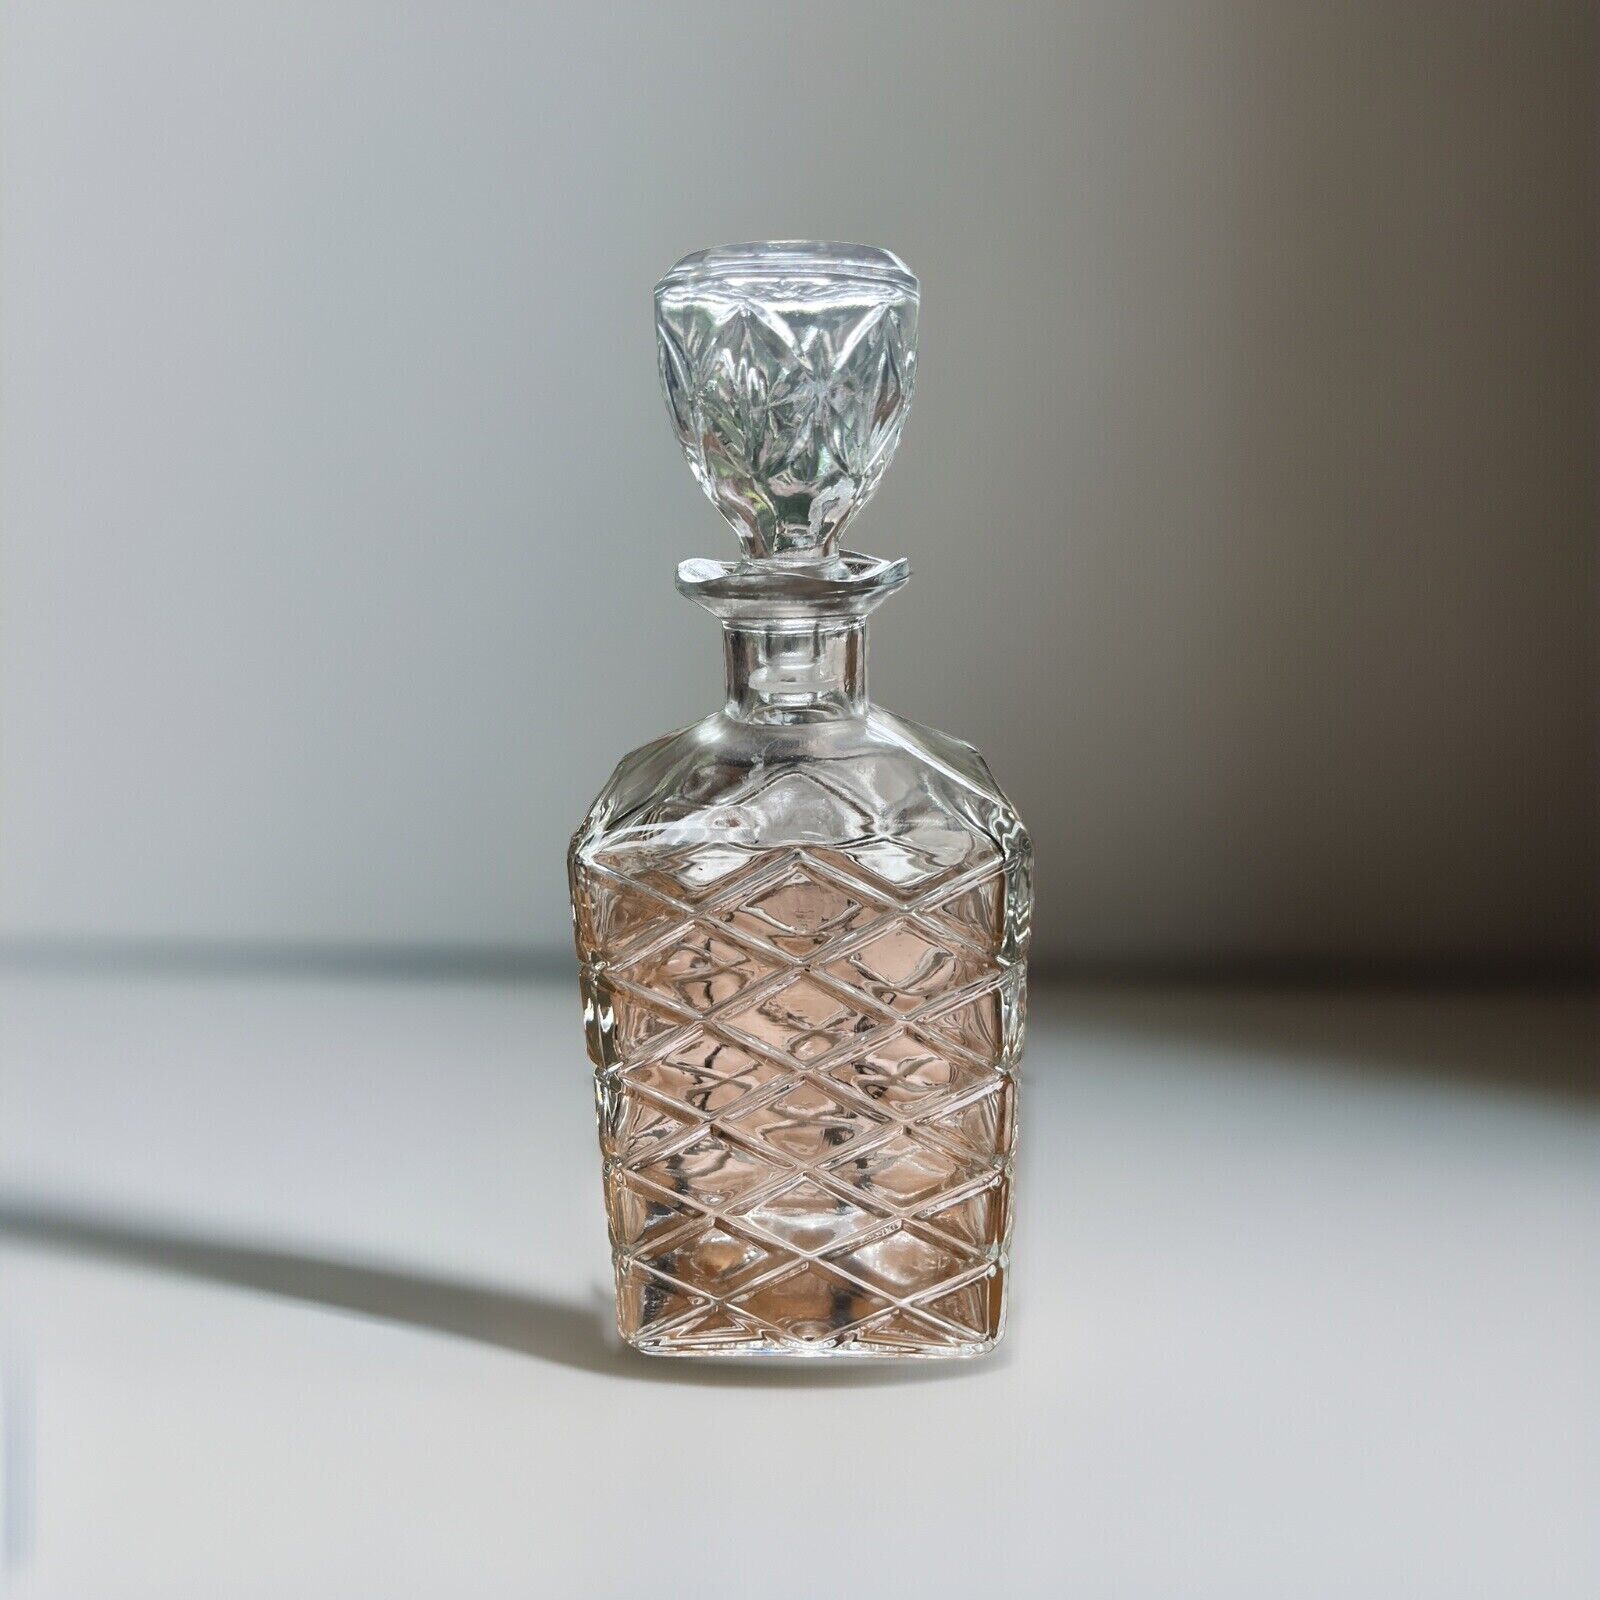 Vintage Glass Crystal Liquor Decanter Bottle with Stopper: Dimond-pattern